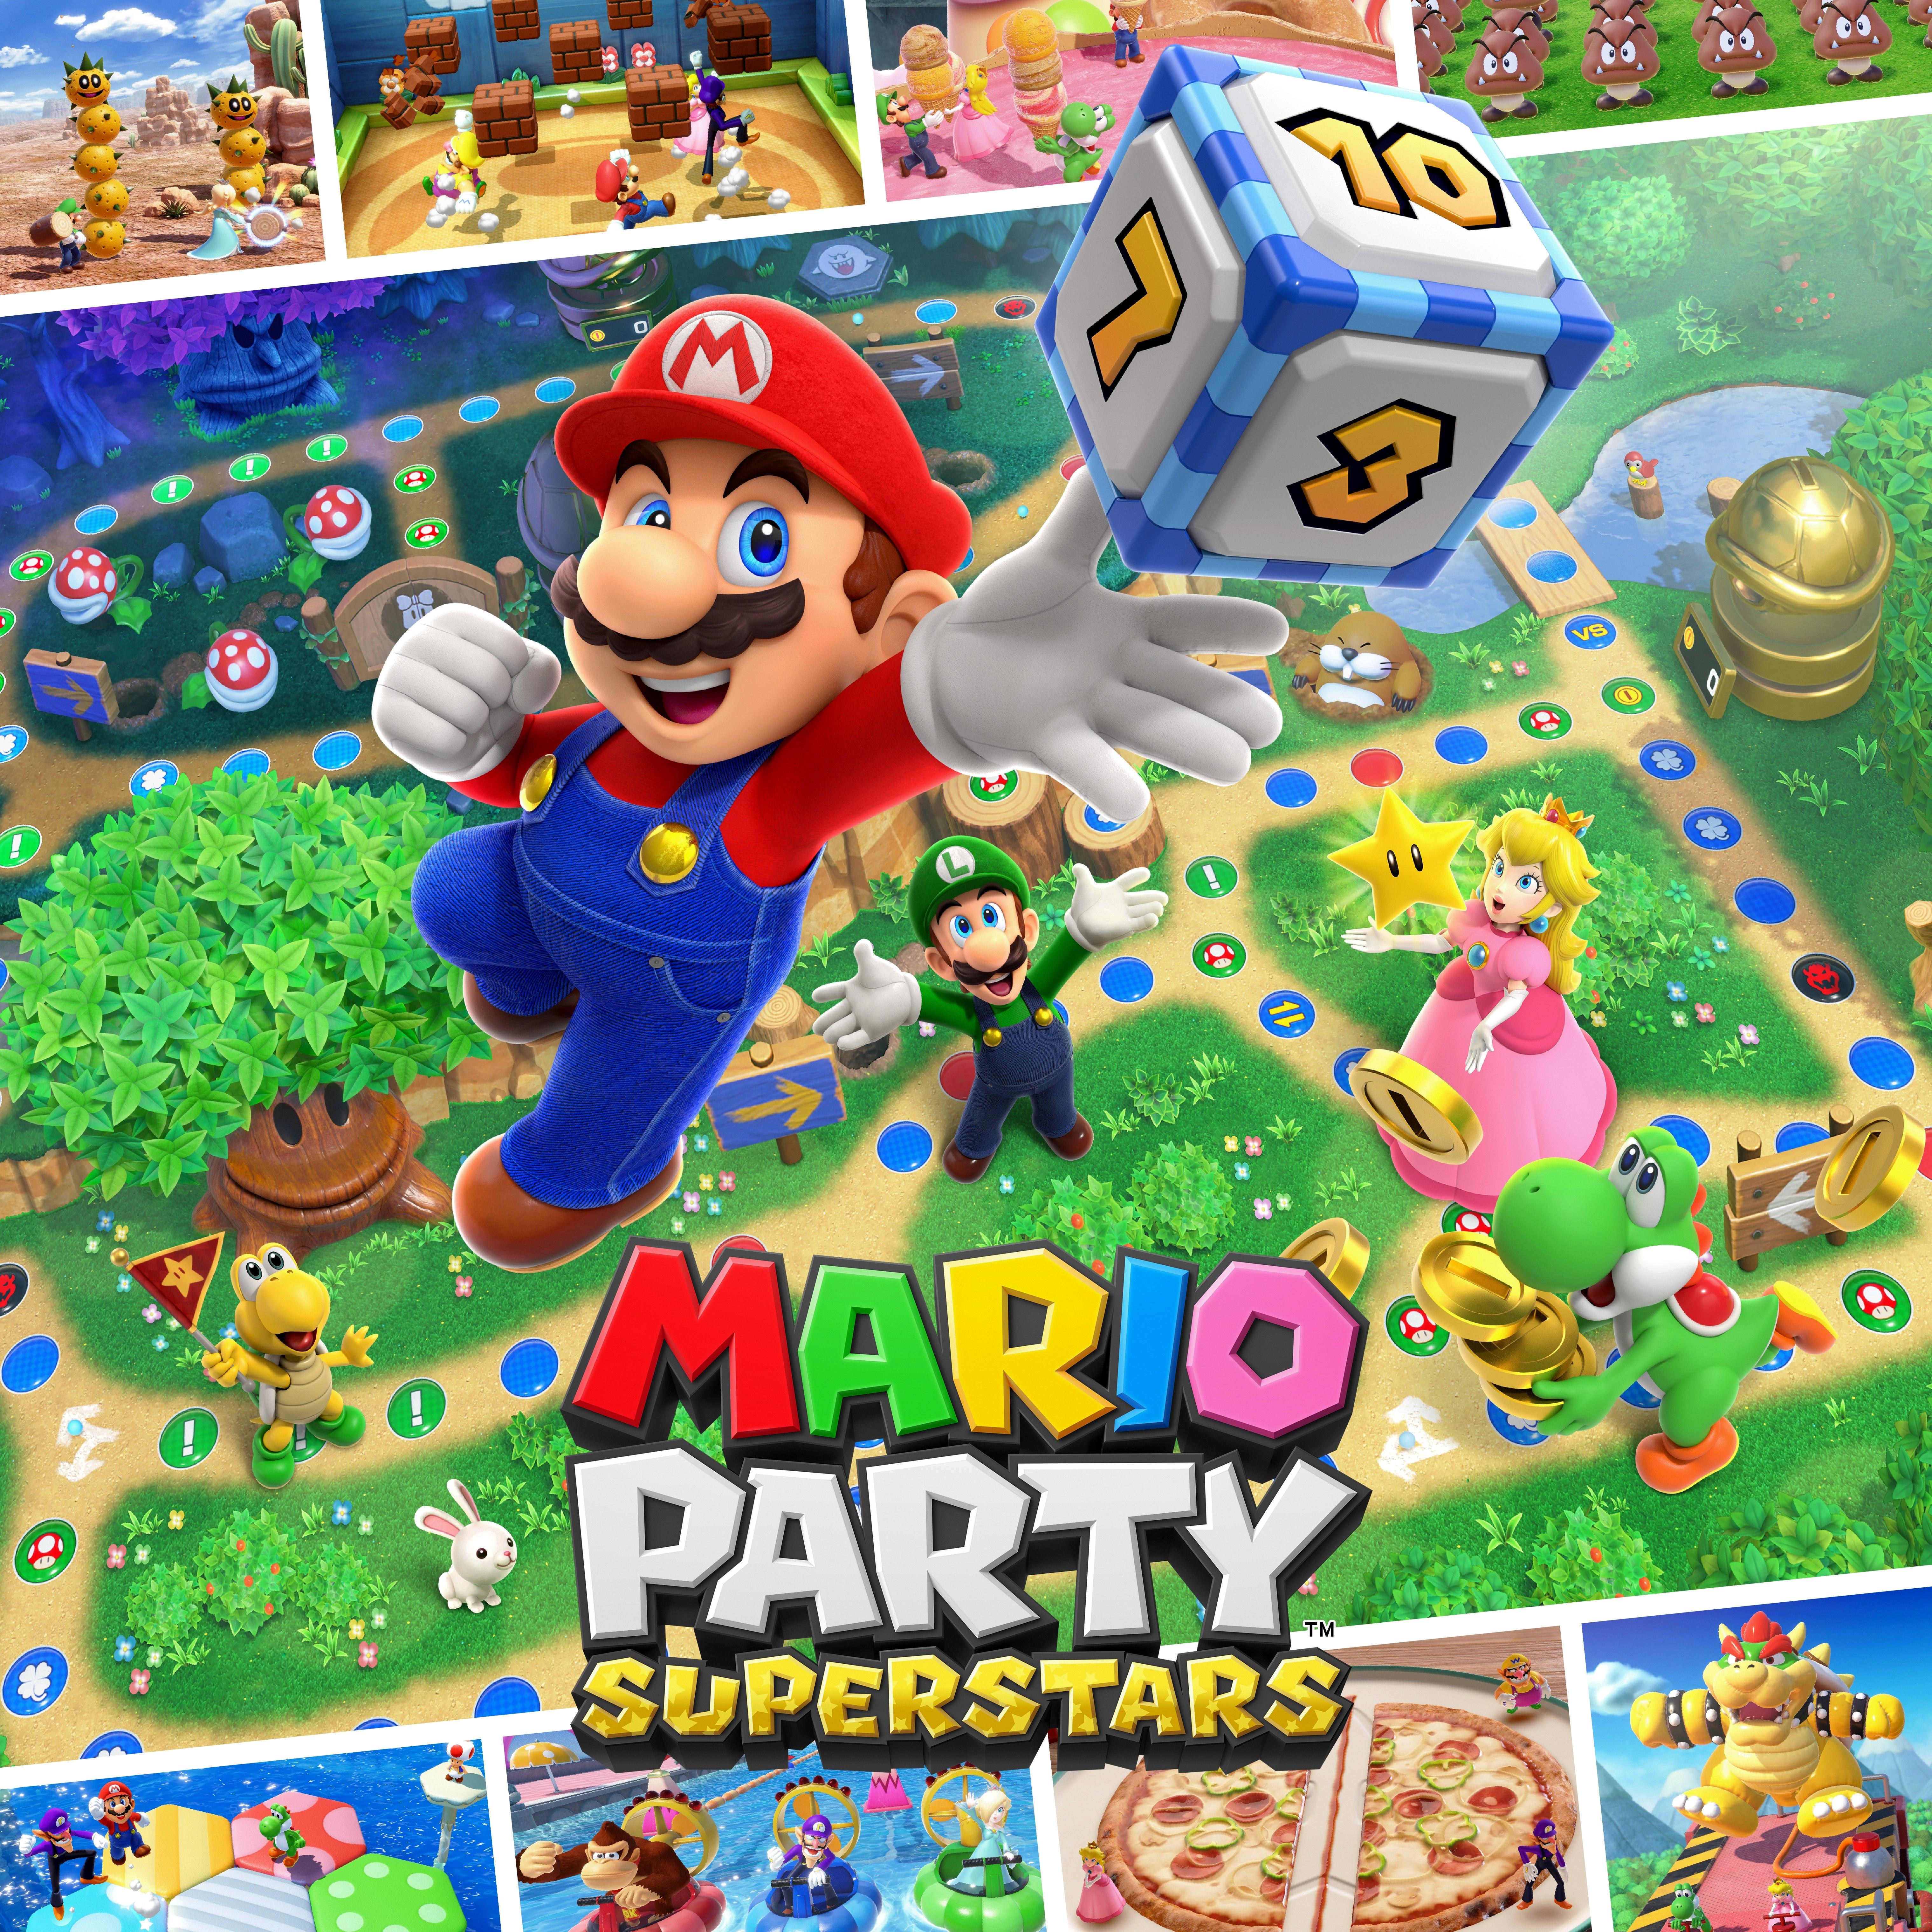 How Long Does Mario Party Superstars Take To Download? 9